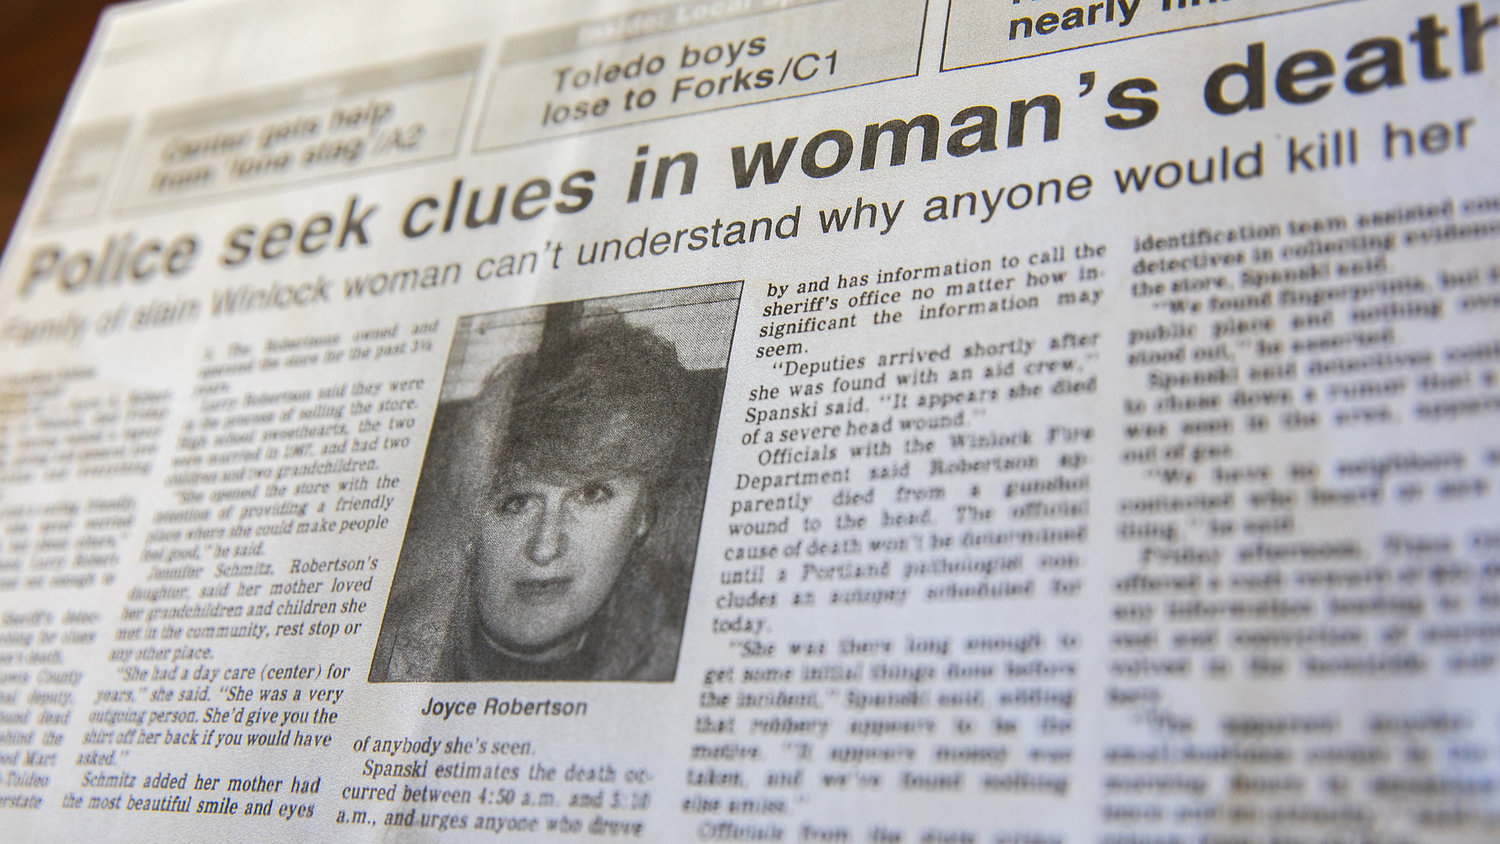 The Feb. 27, 1993, edition of The Chronicle included a picture of Joyce Robertson and the headline ”Police seek clues in woman’s death.”